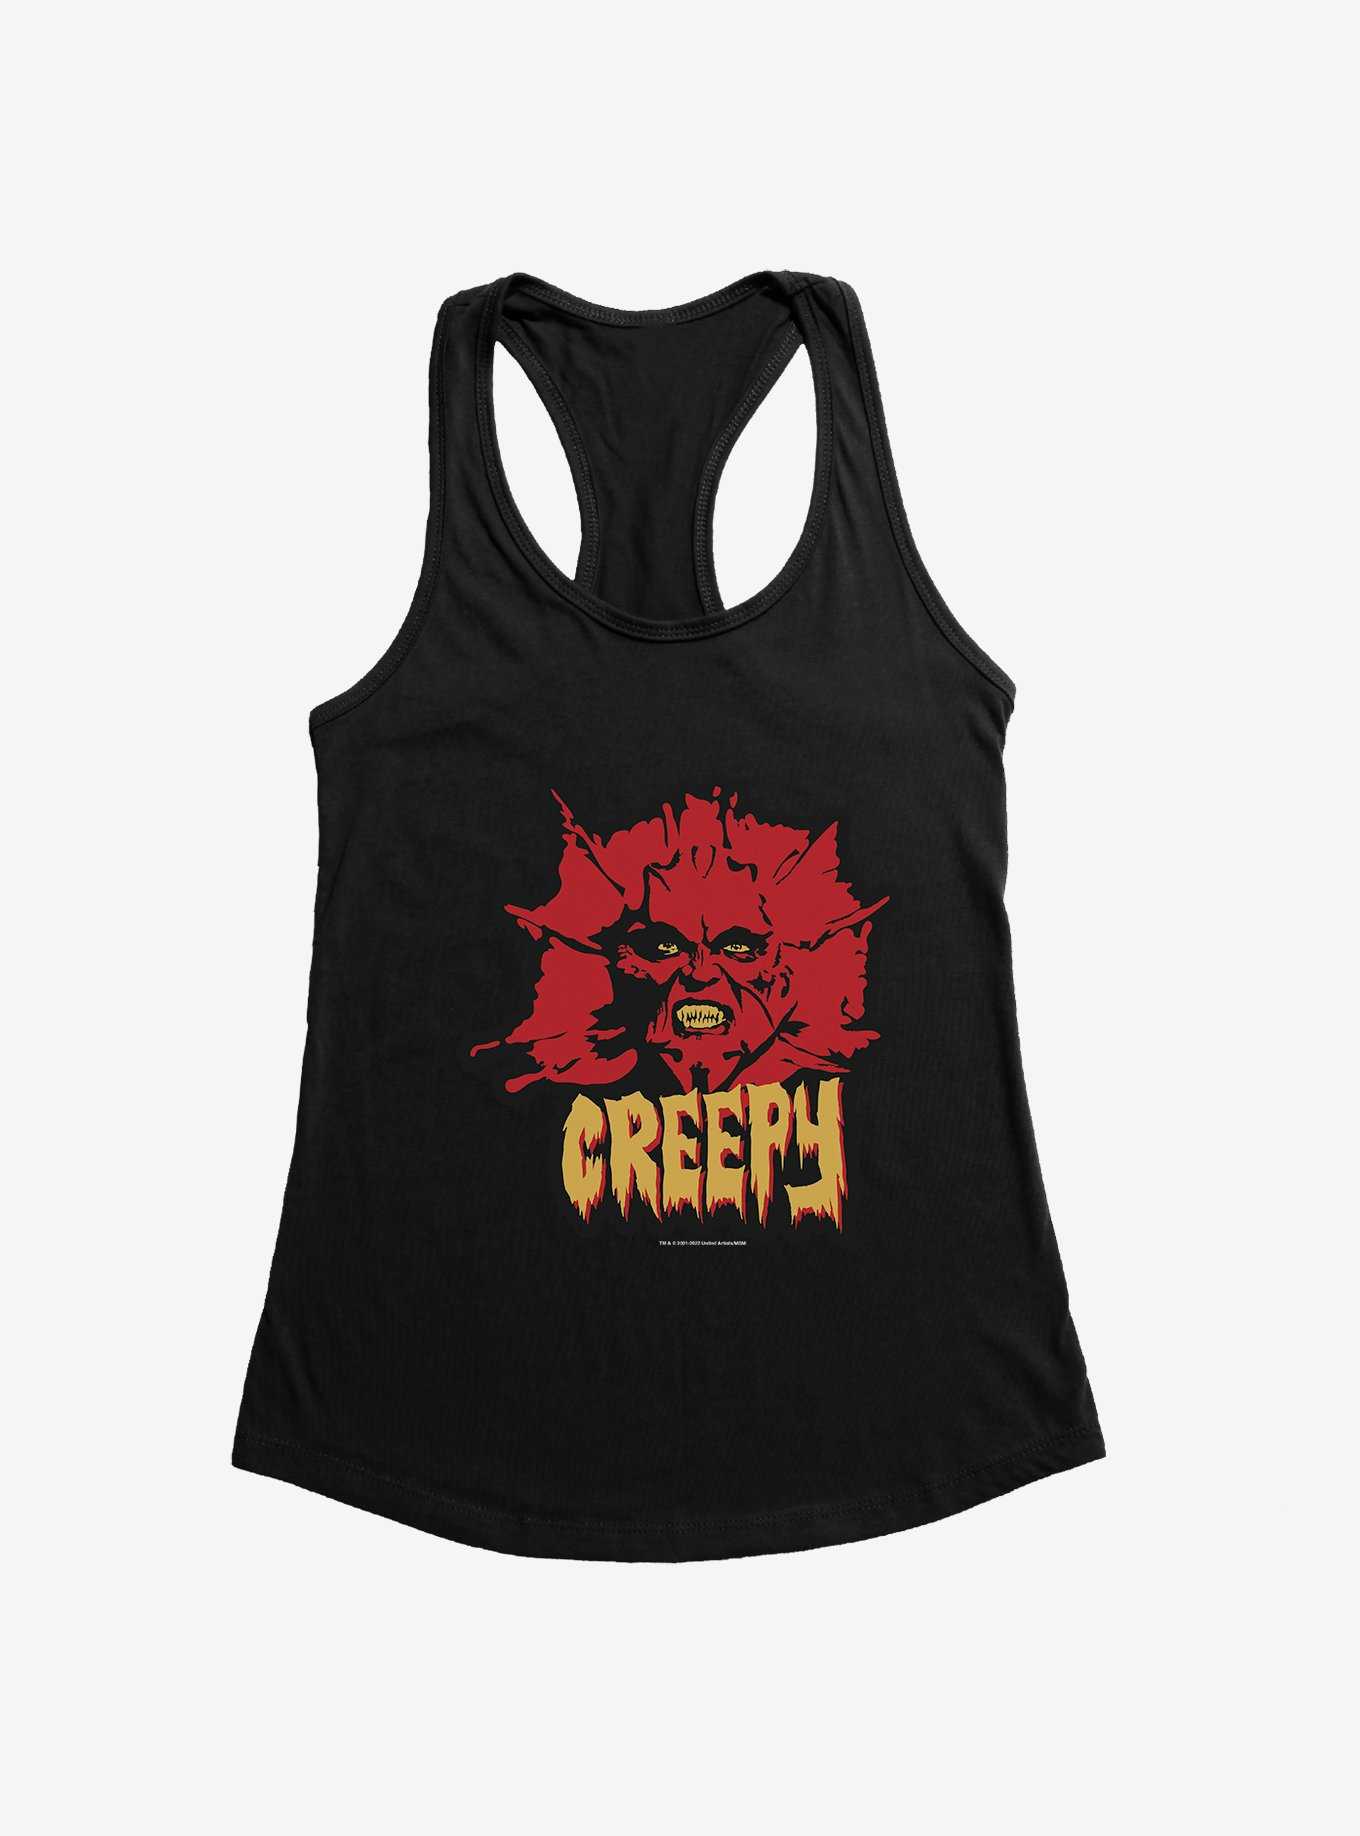 Jeepers Creepers Creepy Womens Tank Top, , hi-res